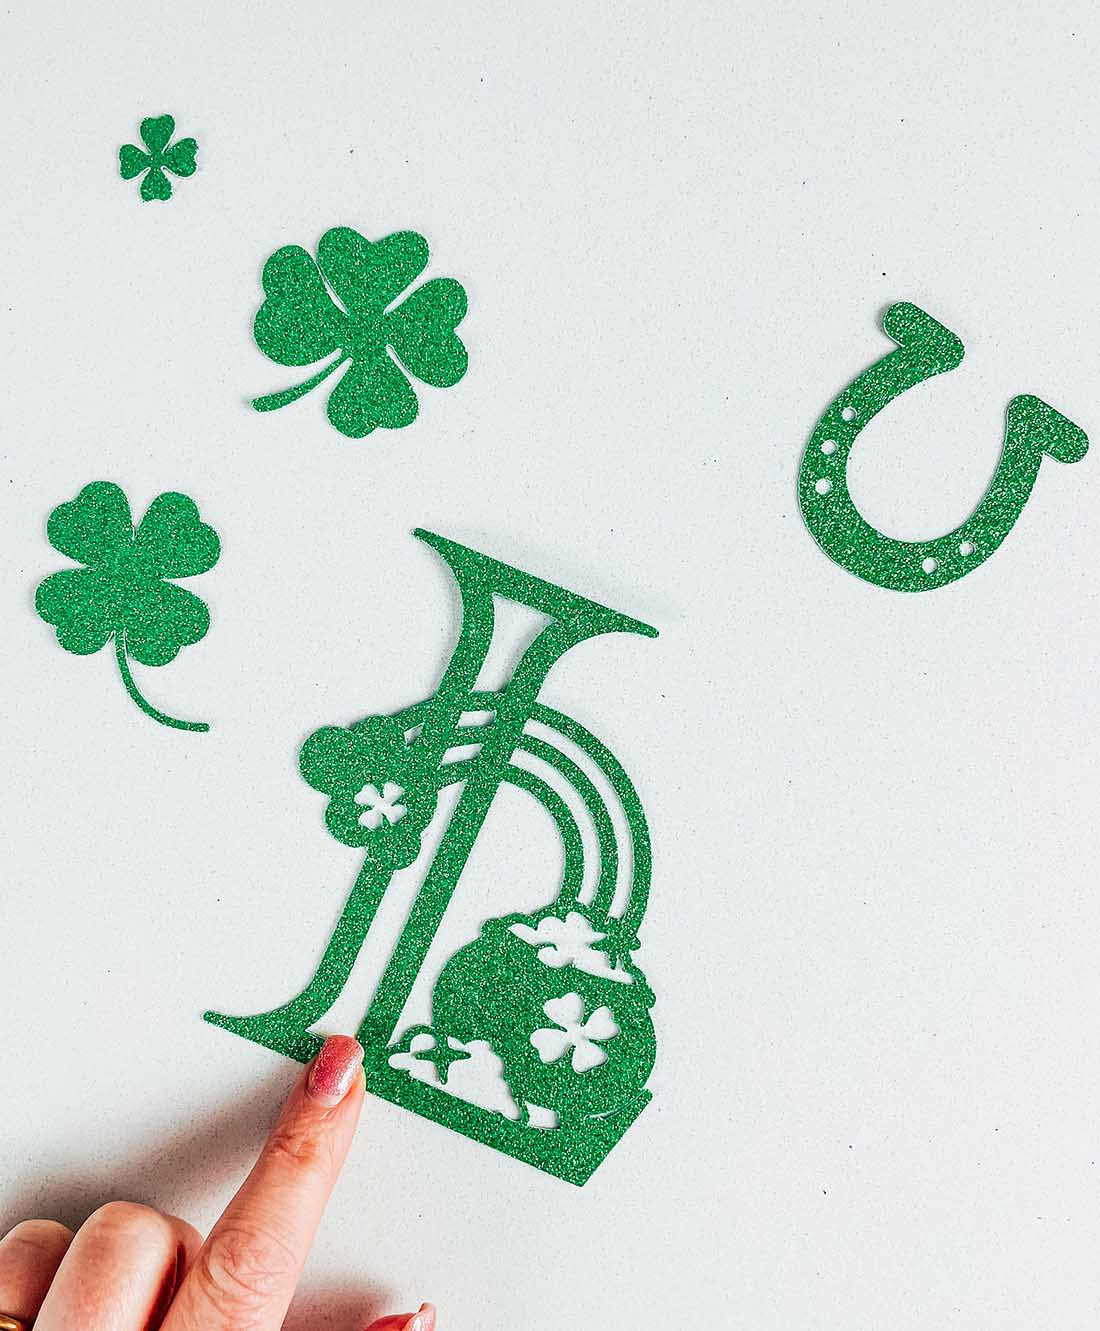 Creating A St. Patricks Day Crafts With Cricut